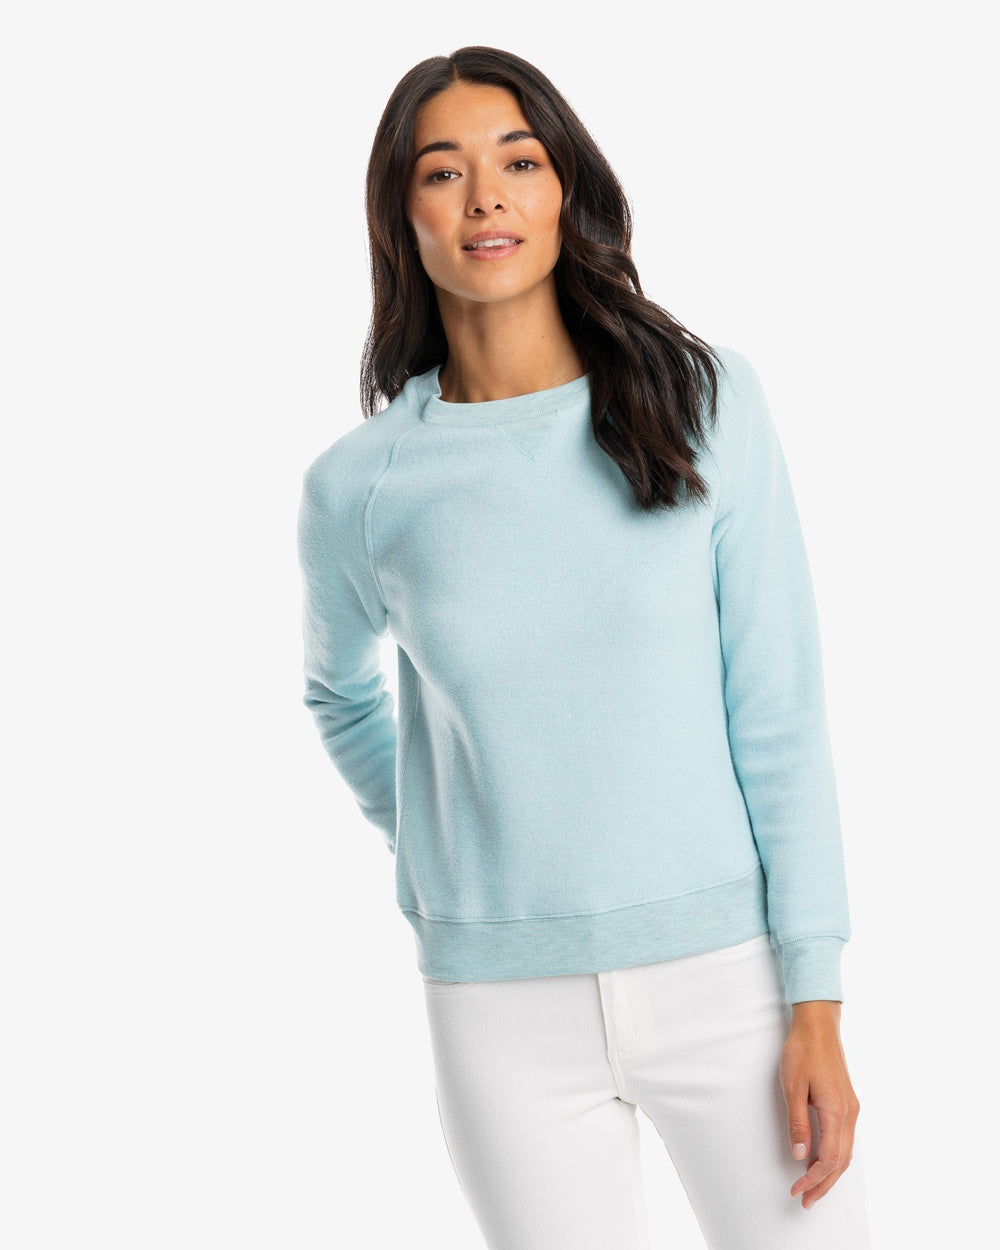 The model front of the Beachside Sun Farer Crewneck Sweatshirt from Southern Tide - Heather Wake Blue